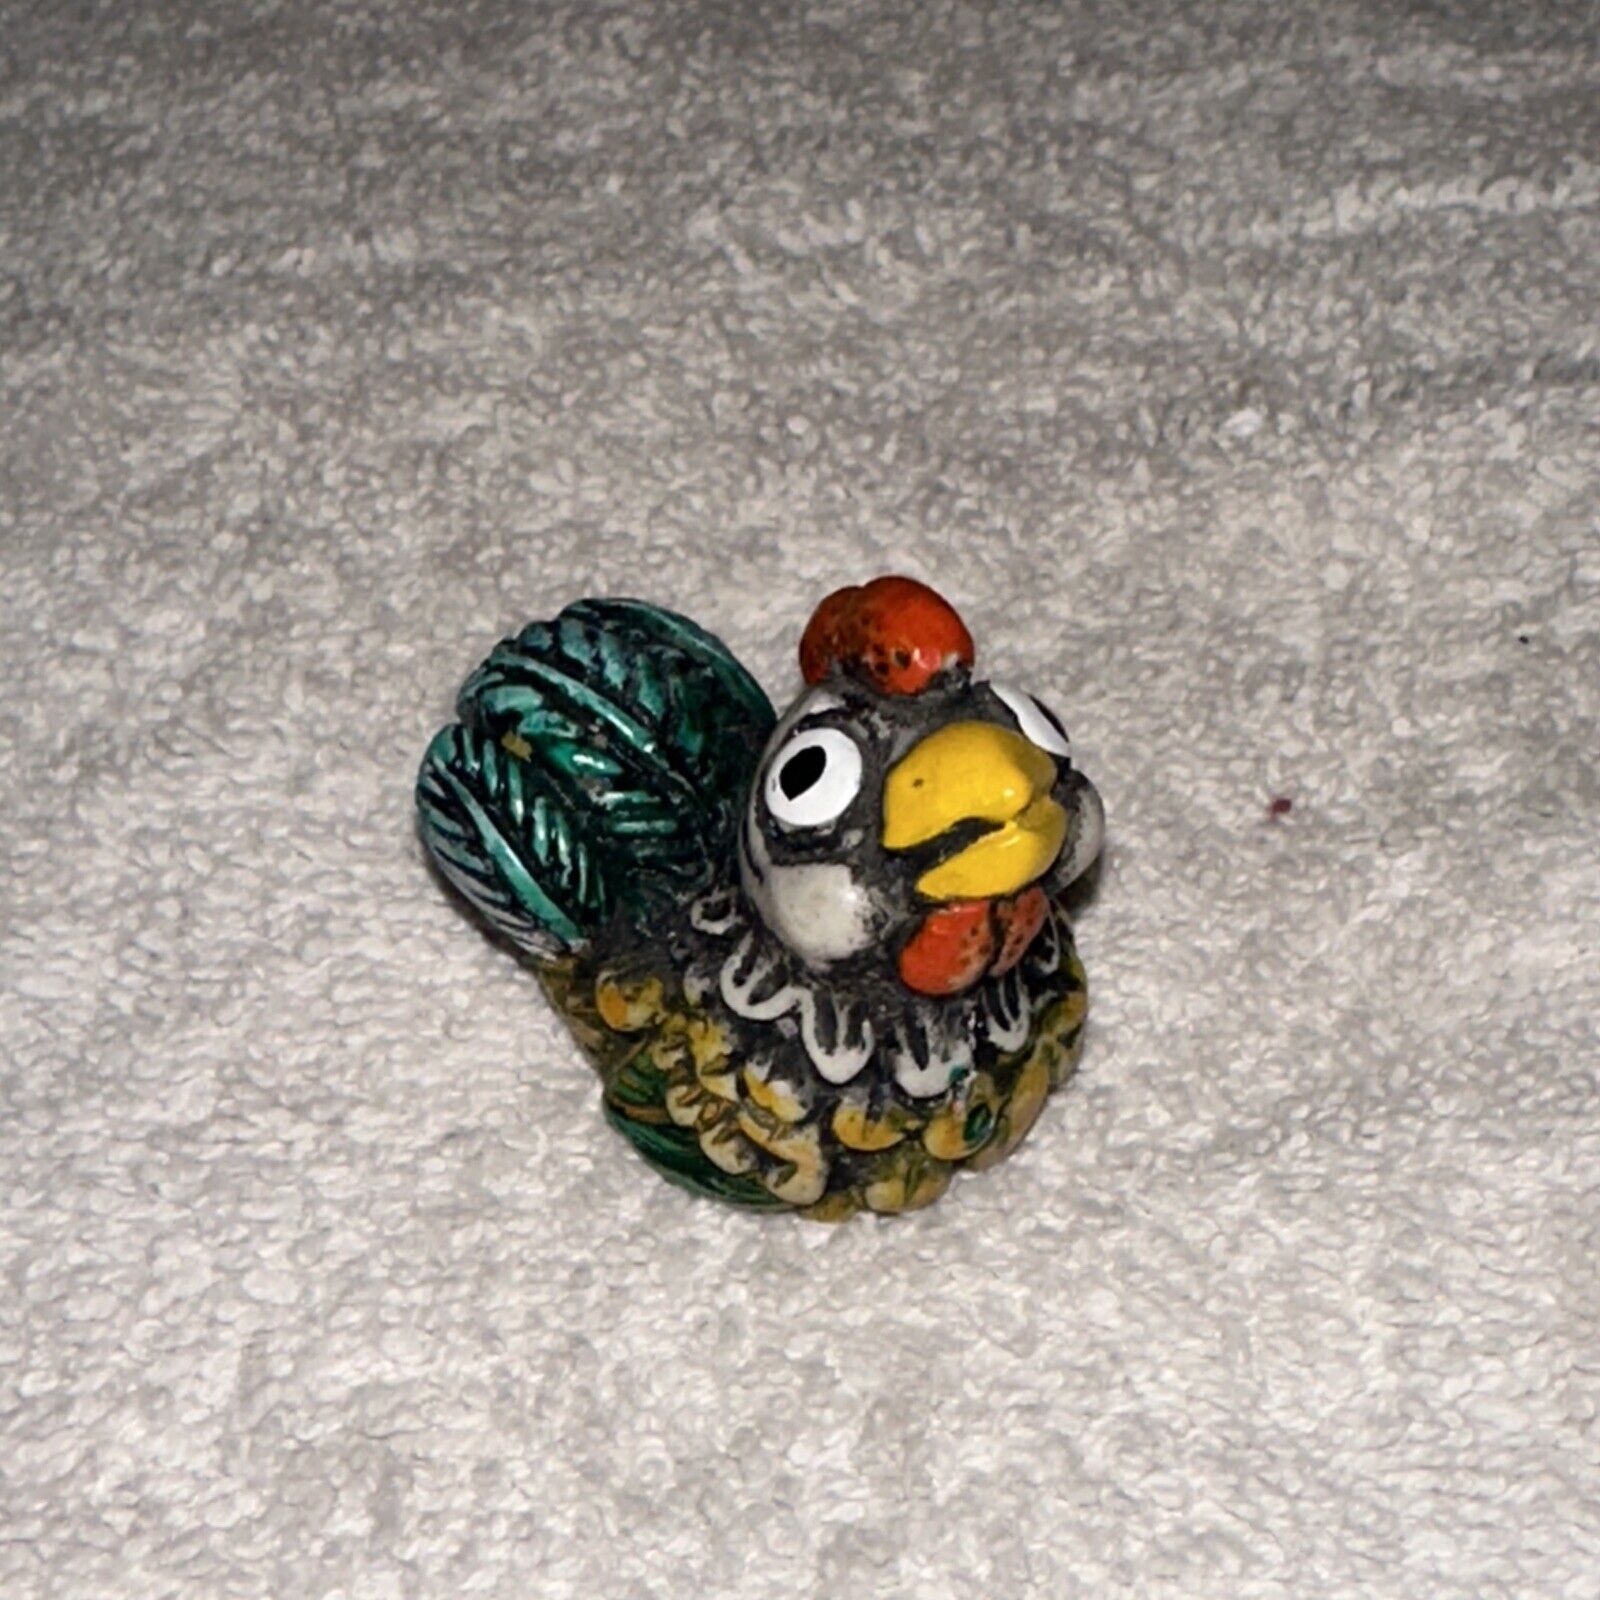 Miniature Hand Painted Resin 2”X 1.75” Crazy Eyes Killa Cockerel Rooster Rare